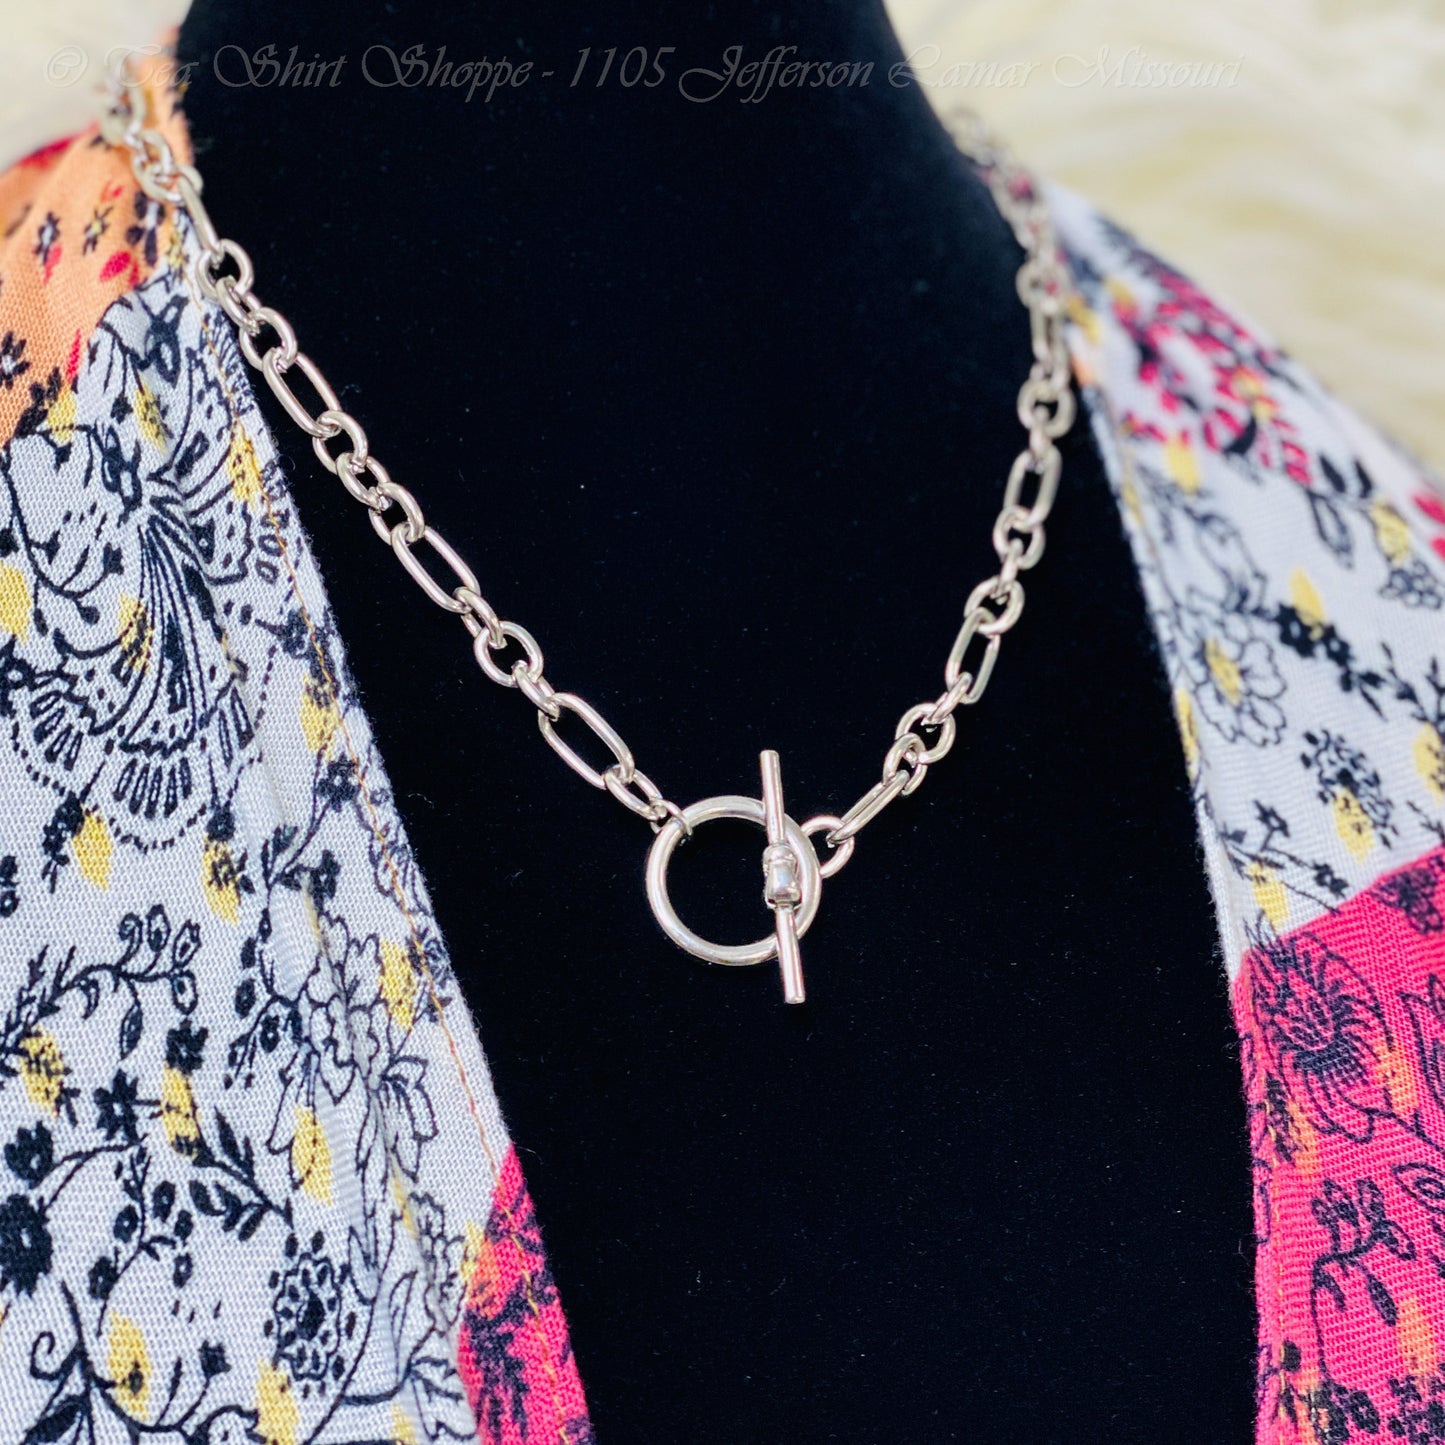 Color: Silver Chain Detail Metal Knot Detail Toggle Closure Non-Adjustable 18" Chain Length 9.5"